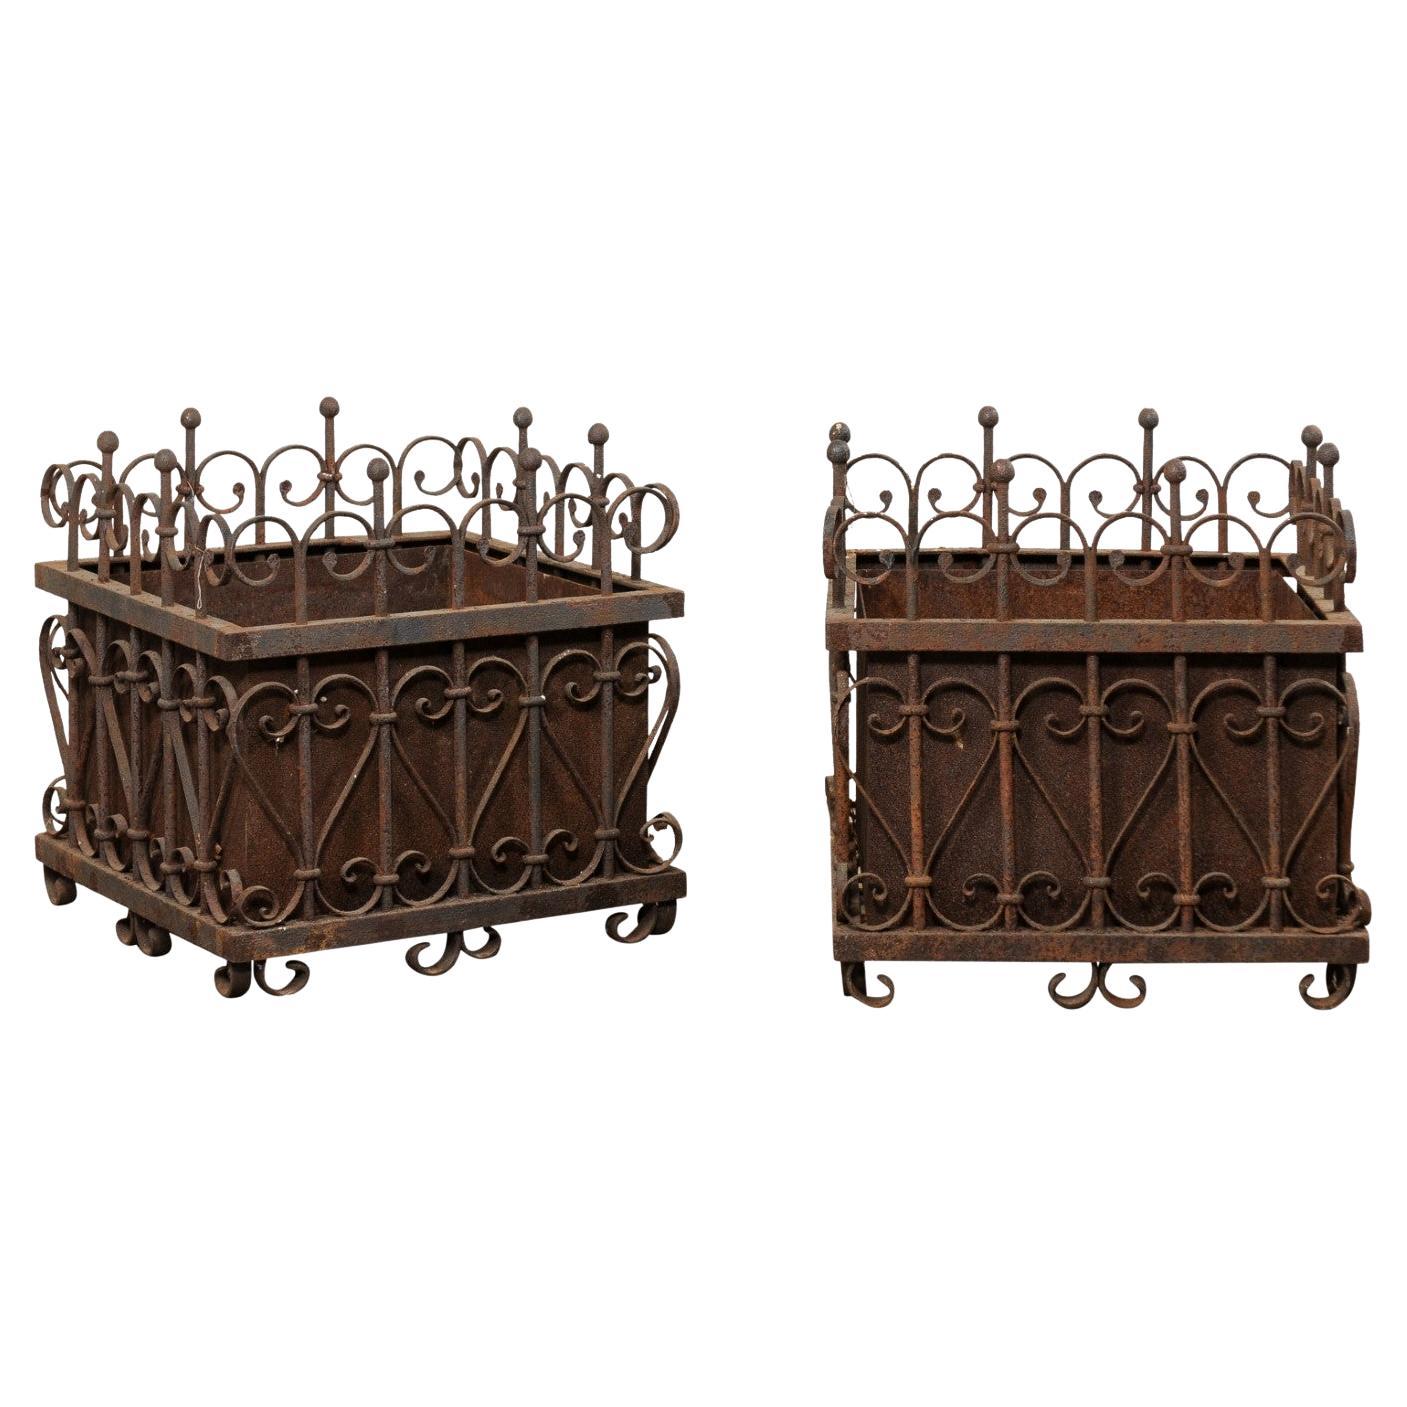 French Pair Beautiful Wrought Iron Square-Shaped Planters, Early 20th C.